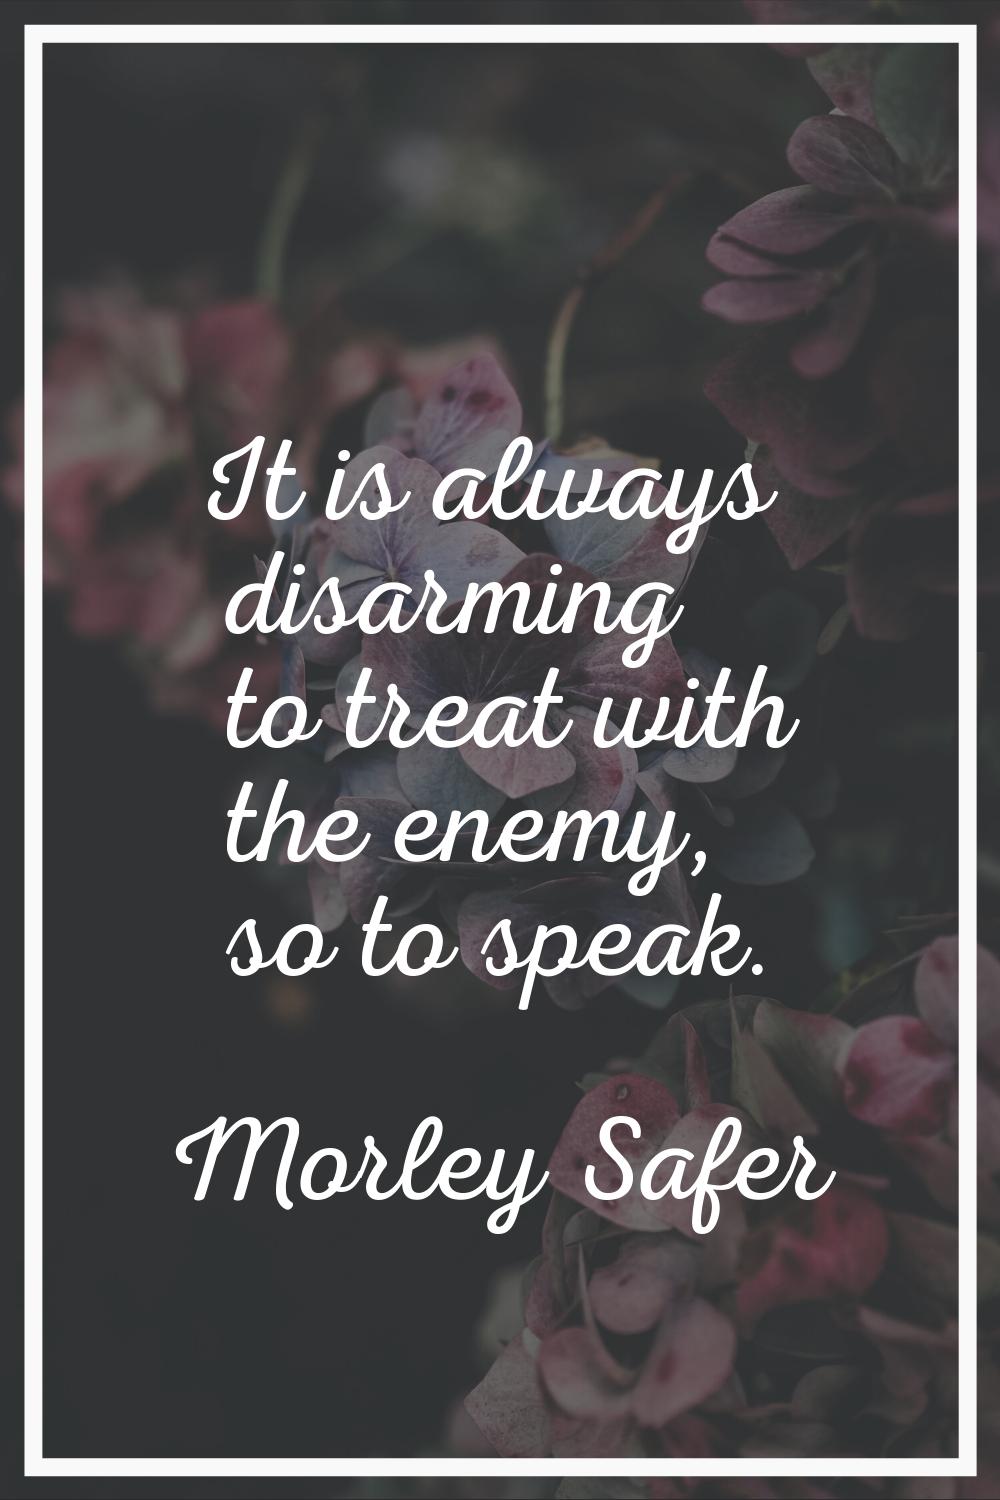 It is always disarming to treat with the enemy, so to speak.